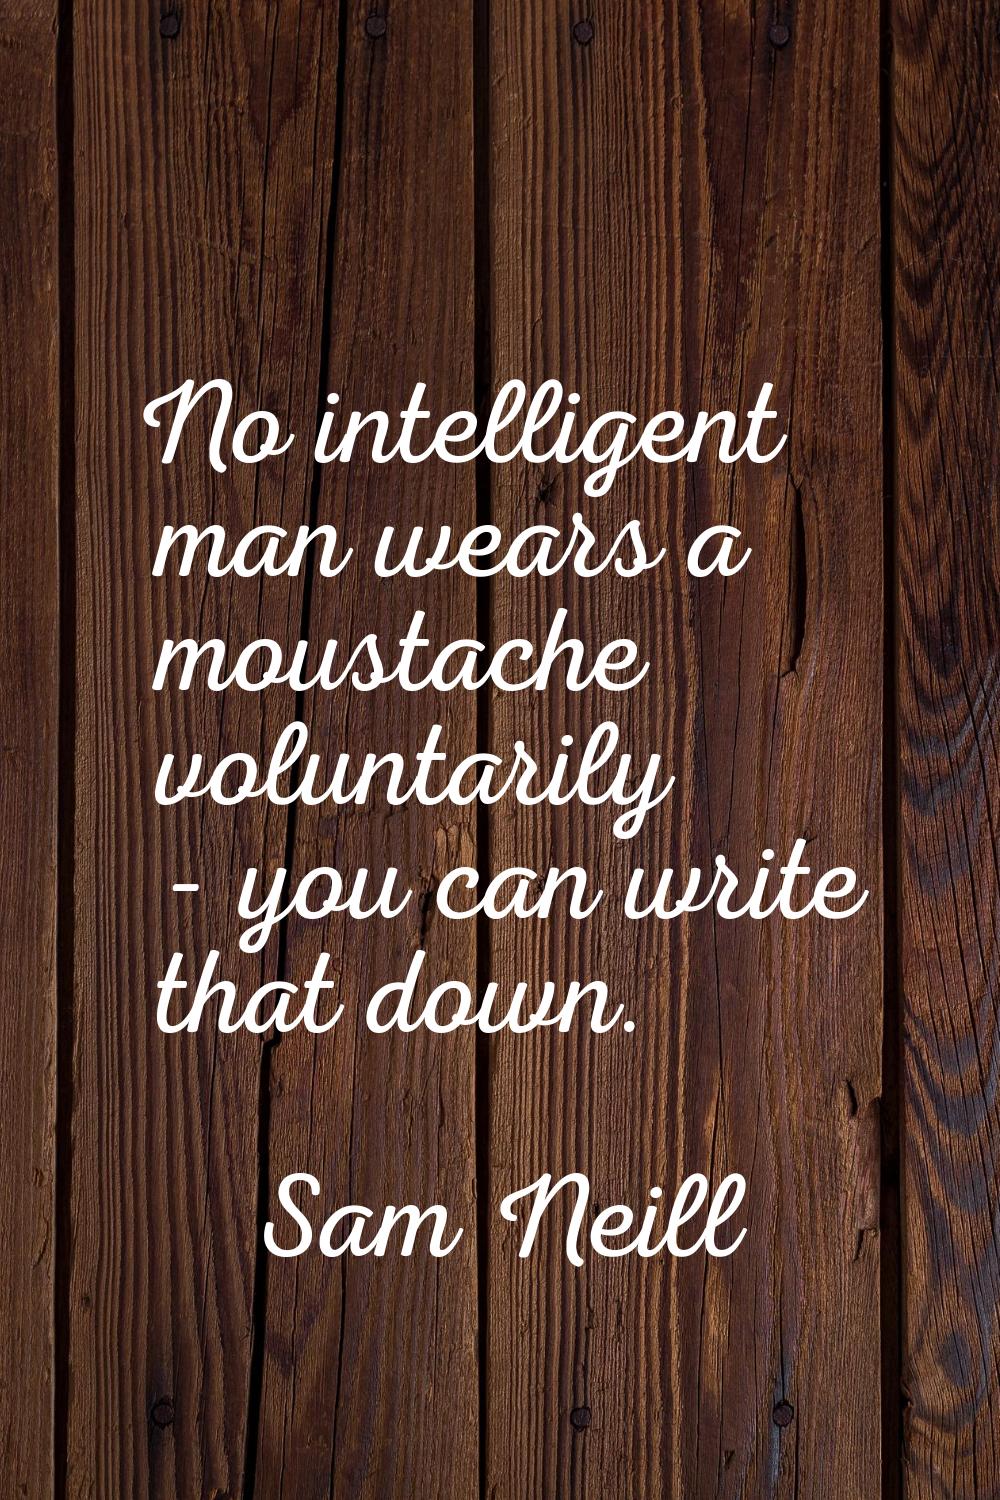 No intelligent man wears a moustache voluntarily - you can write that down.